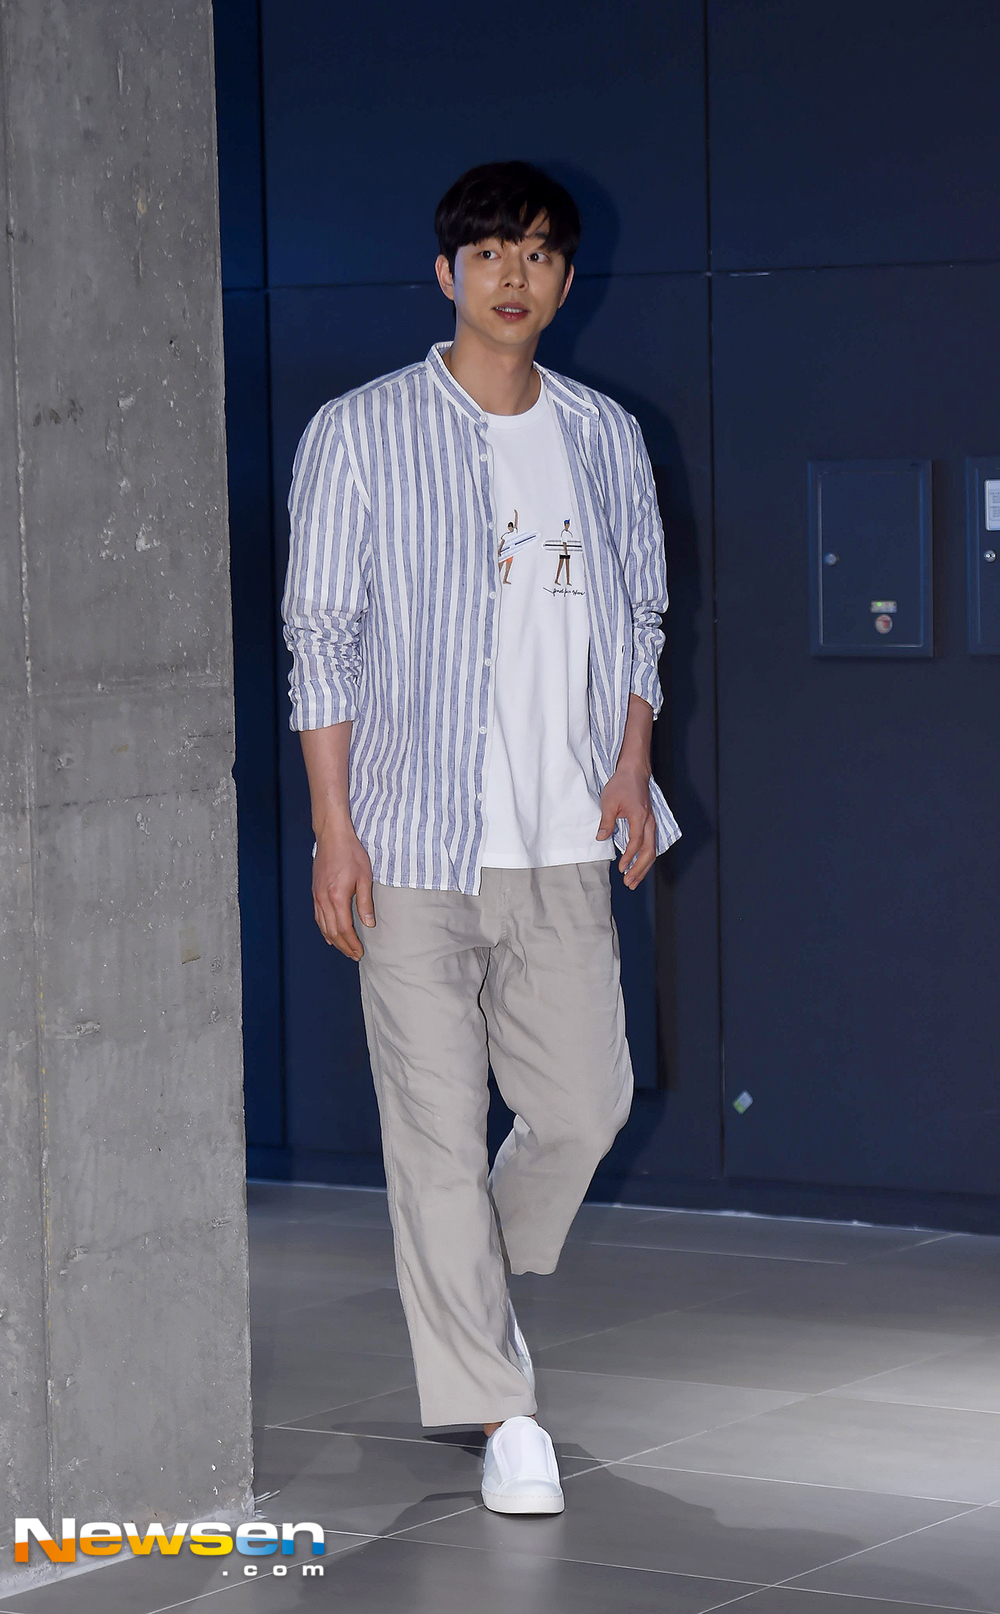 The Epigram Gong Yoo photo event was held on May 29 at the Seoul Yongsan District IPark Mall.On that day, Gong Yoo is taking a stand.kim hye-jin